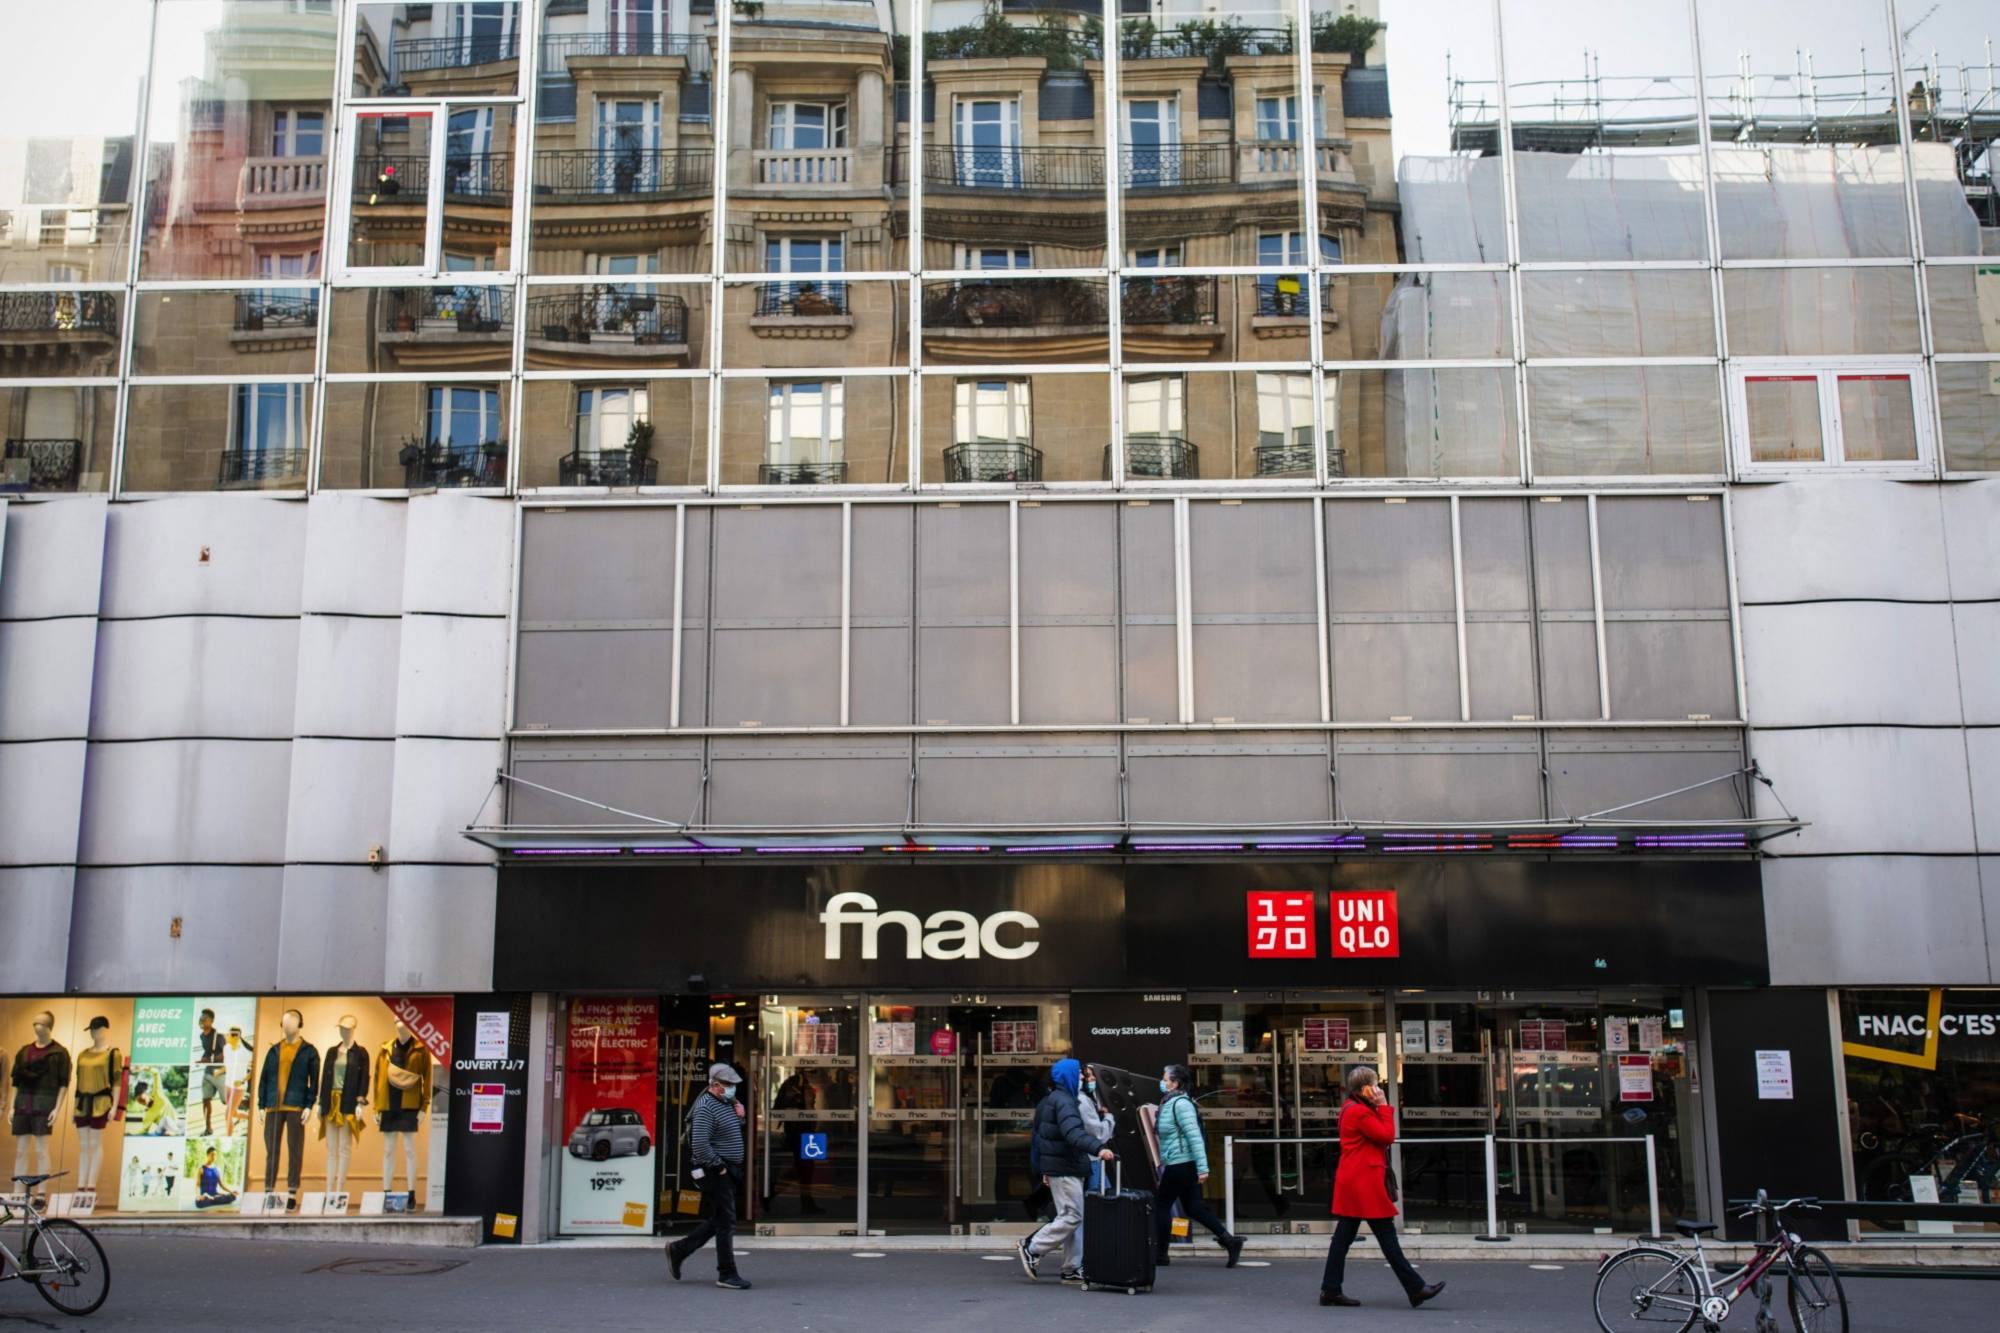 A Uniqlo clothing store, operated by Fast Retailing Co., in Paris | BLOOMBERG